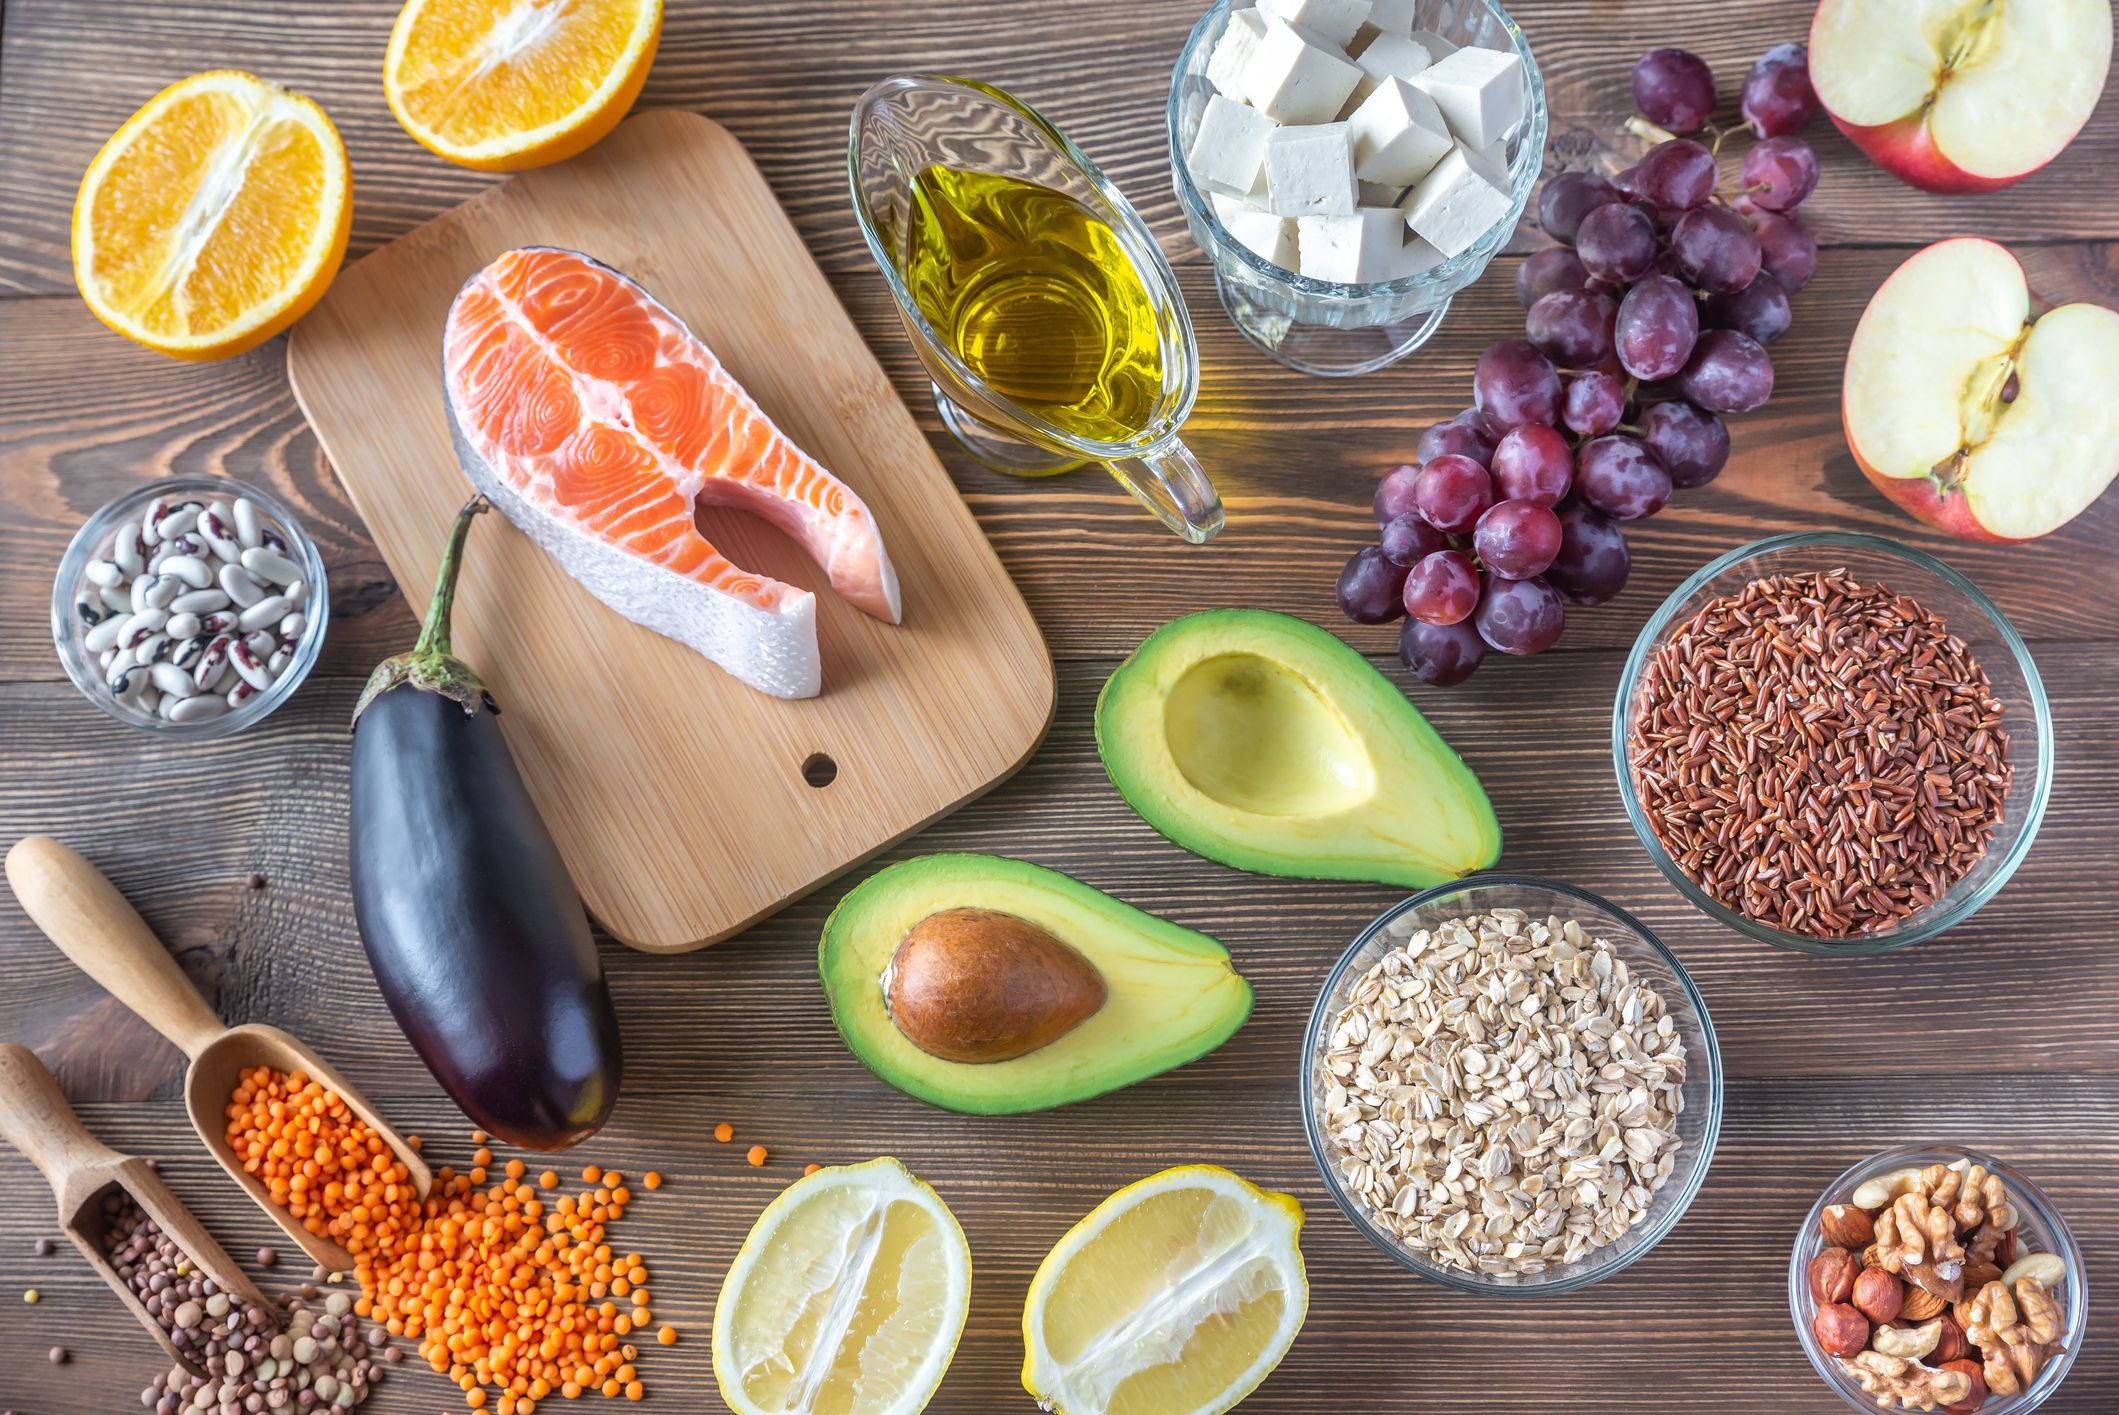 Foods high in omega-3 fatty acids, Vitamin D, Vitamin E, and zinc have been commonly associated with a strong immune system.